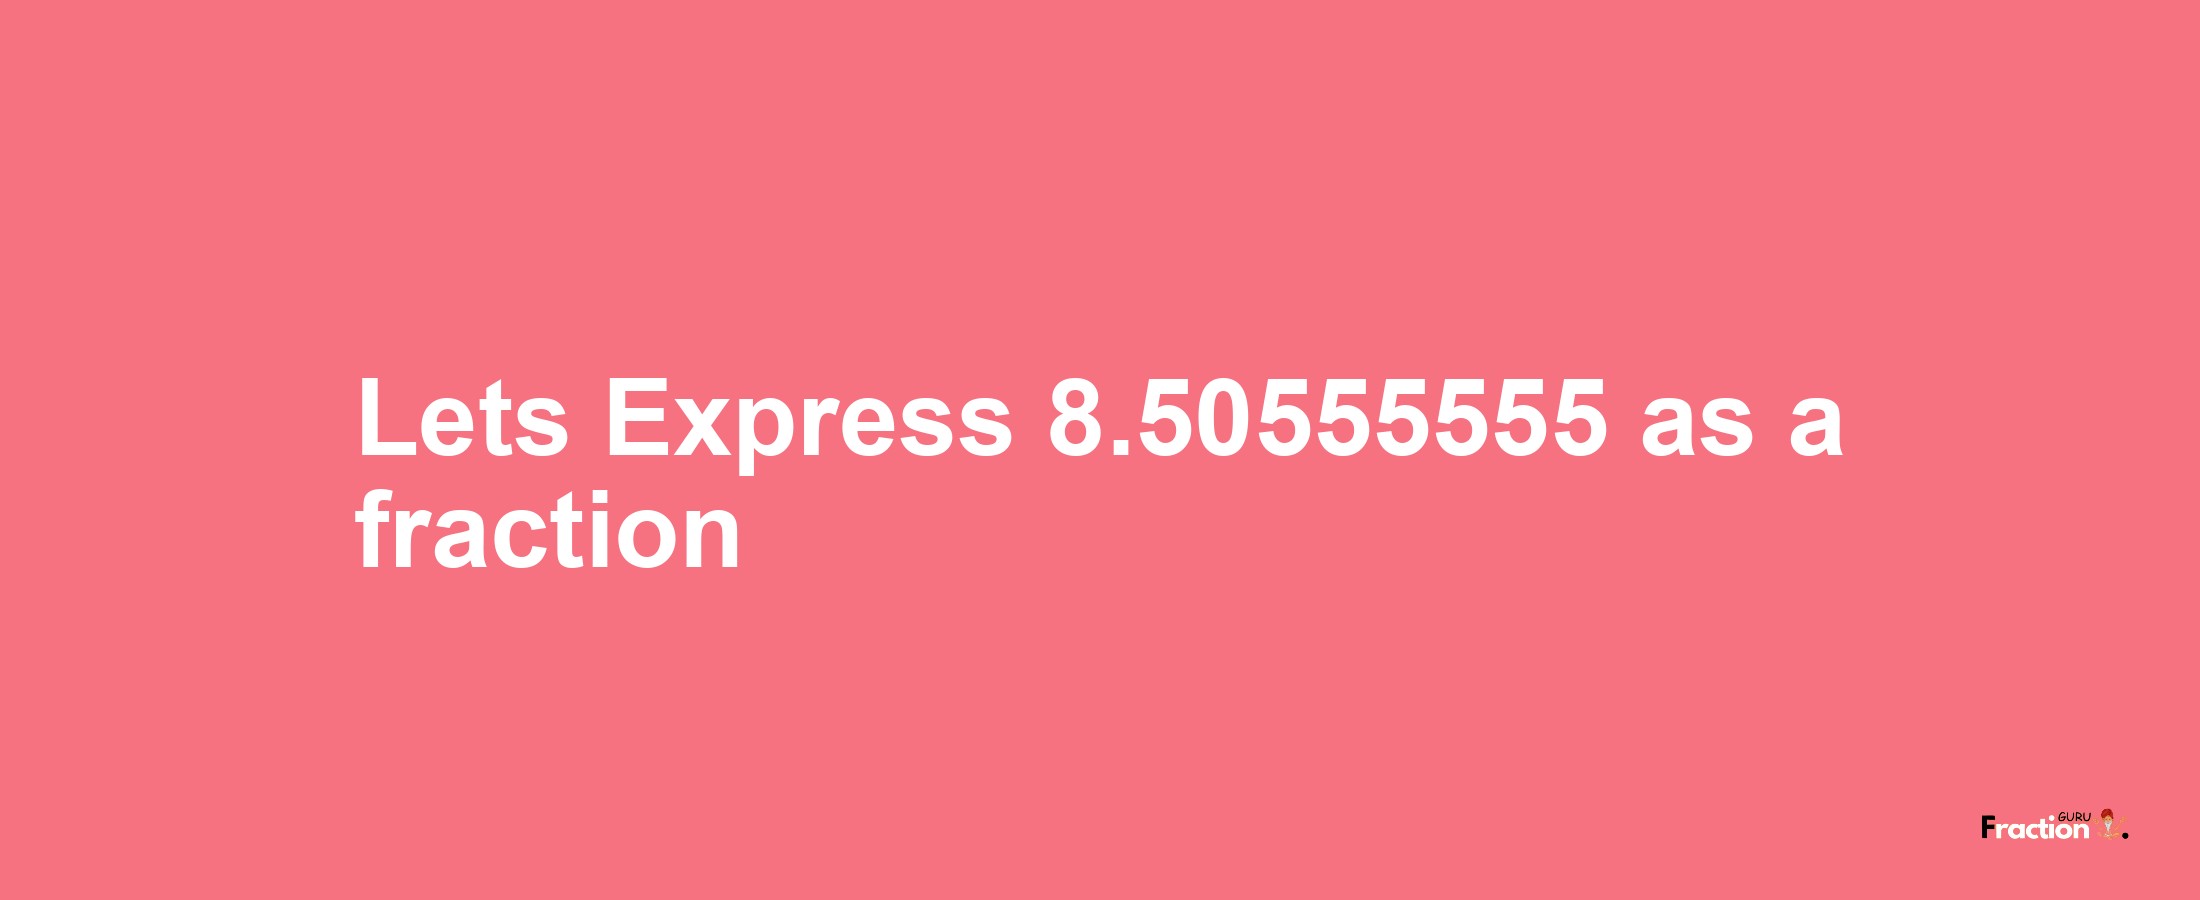 Lets Express 8.50555555 as afraction